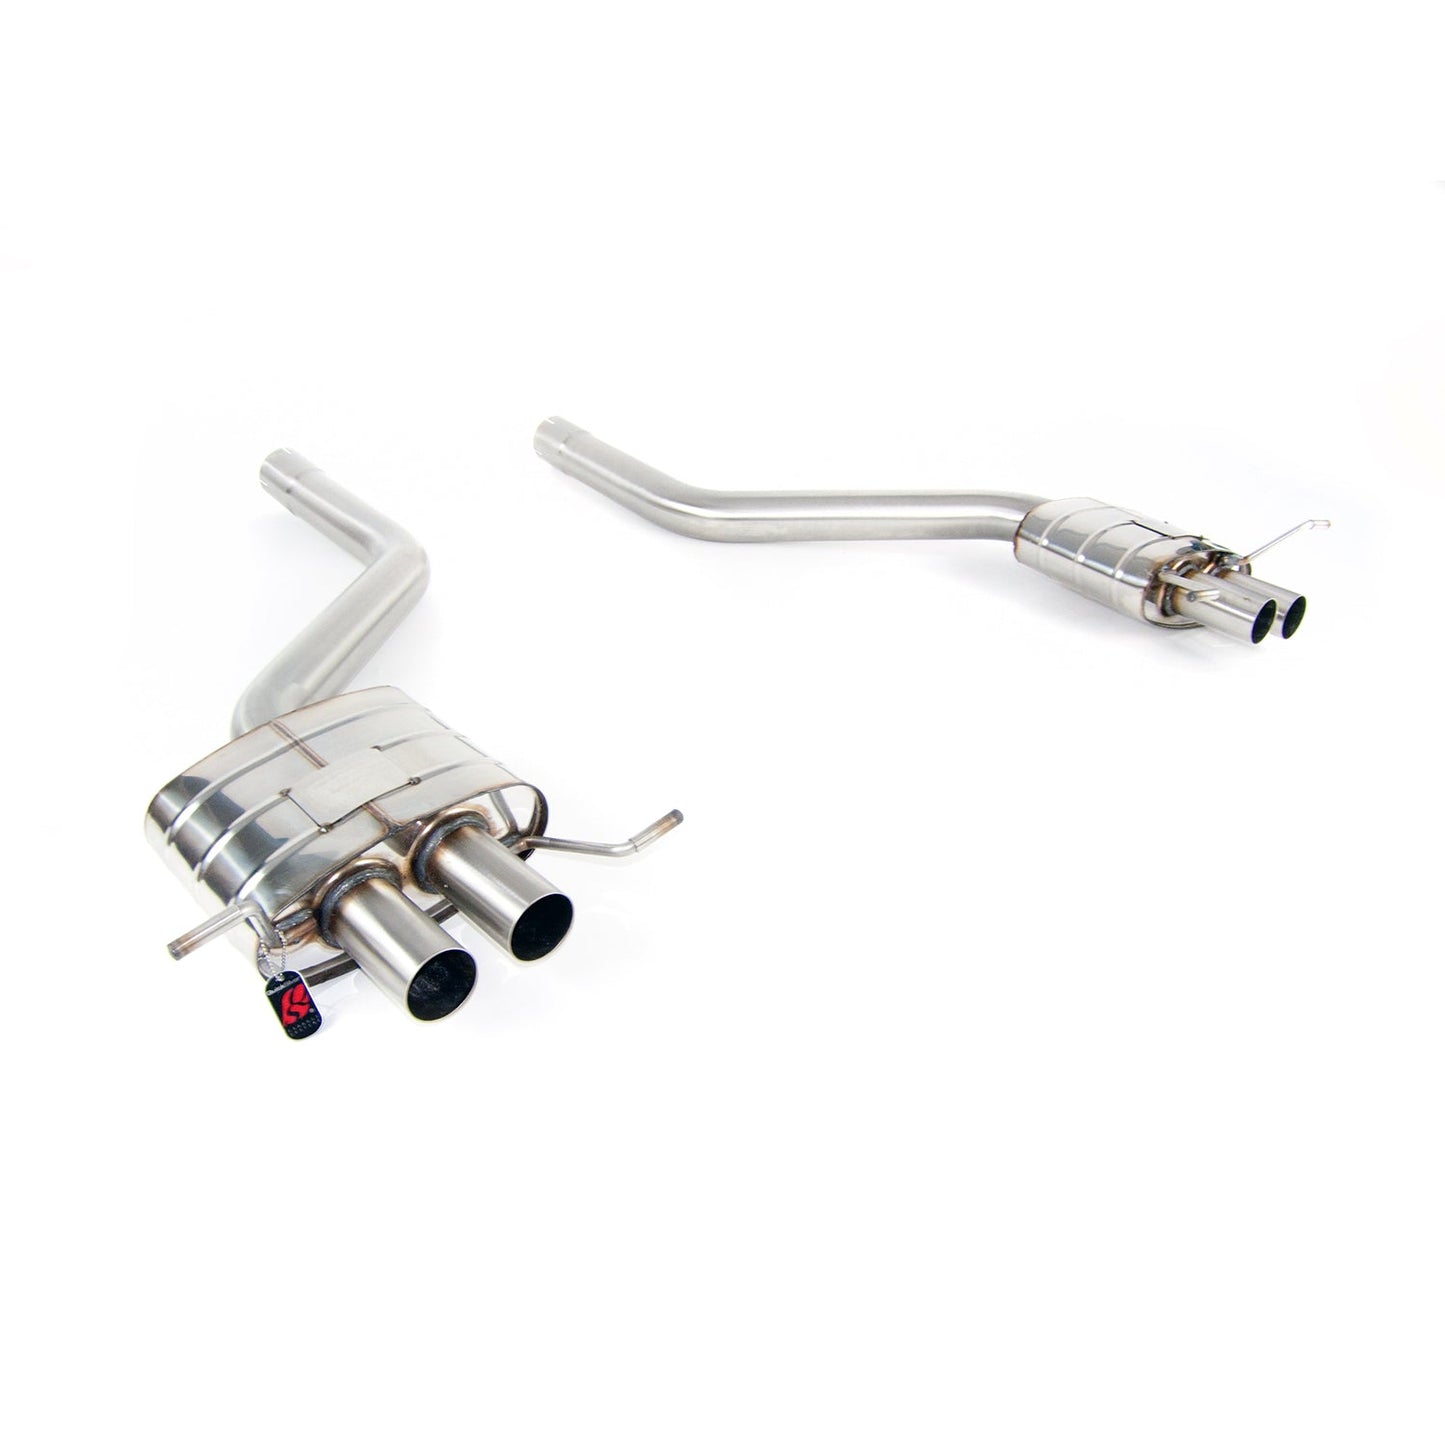 Bentley Continental GT and GTC and Super Sports W12 - Sport Exhaust (2004-17) - QuickSilver Exhausts